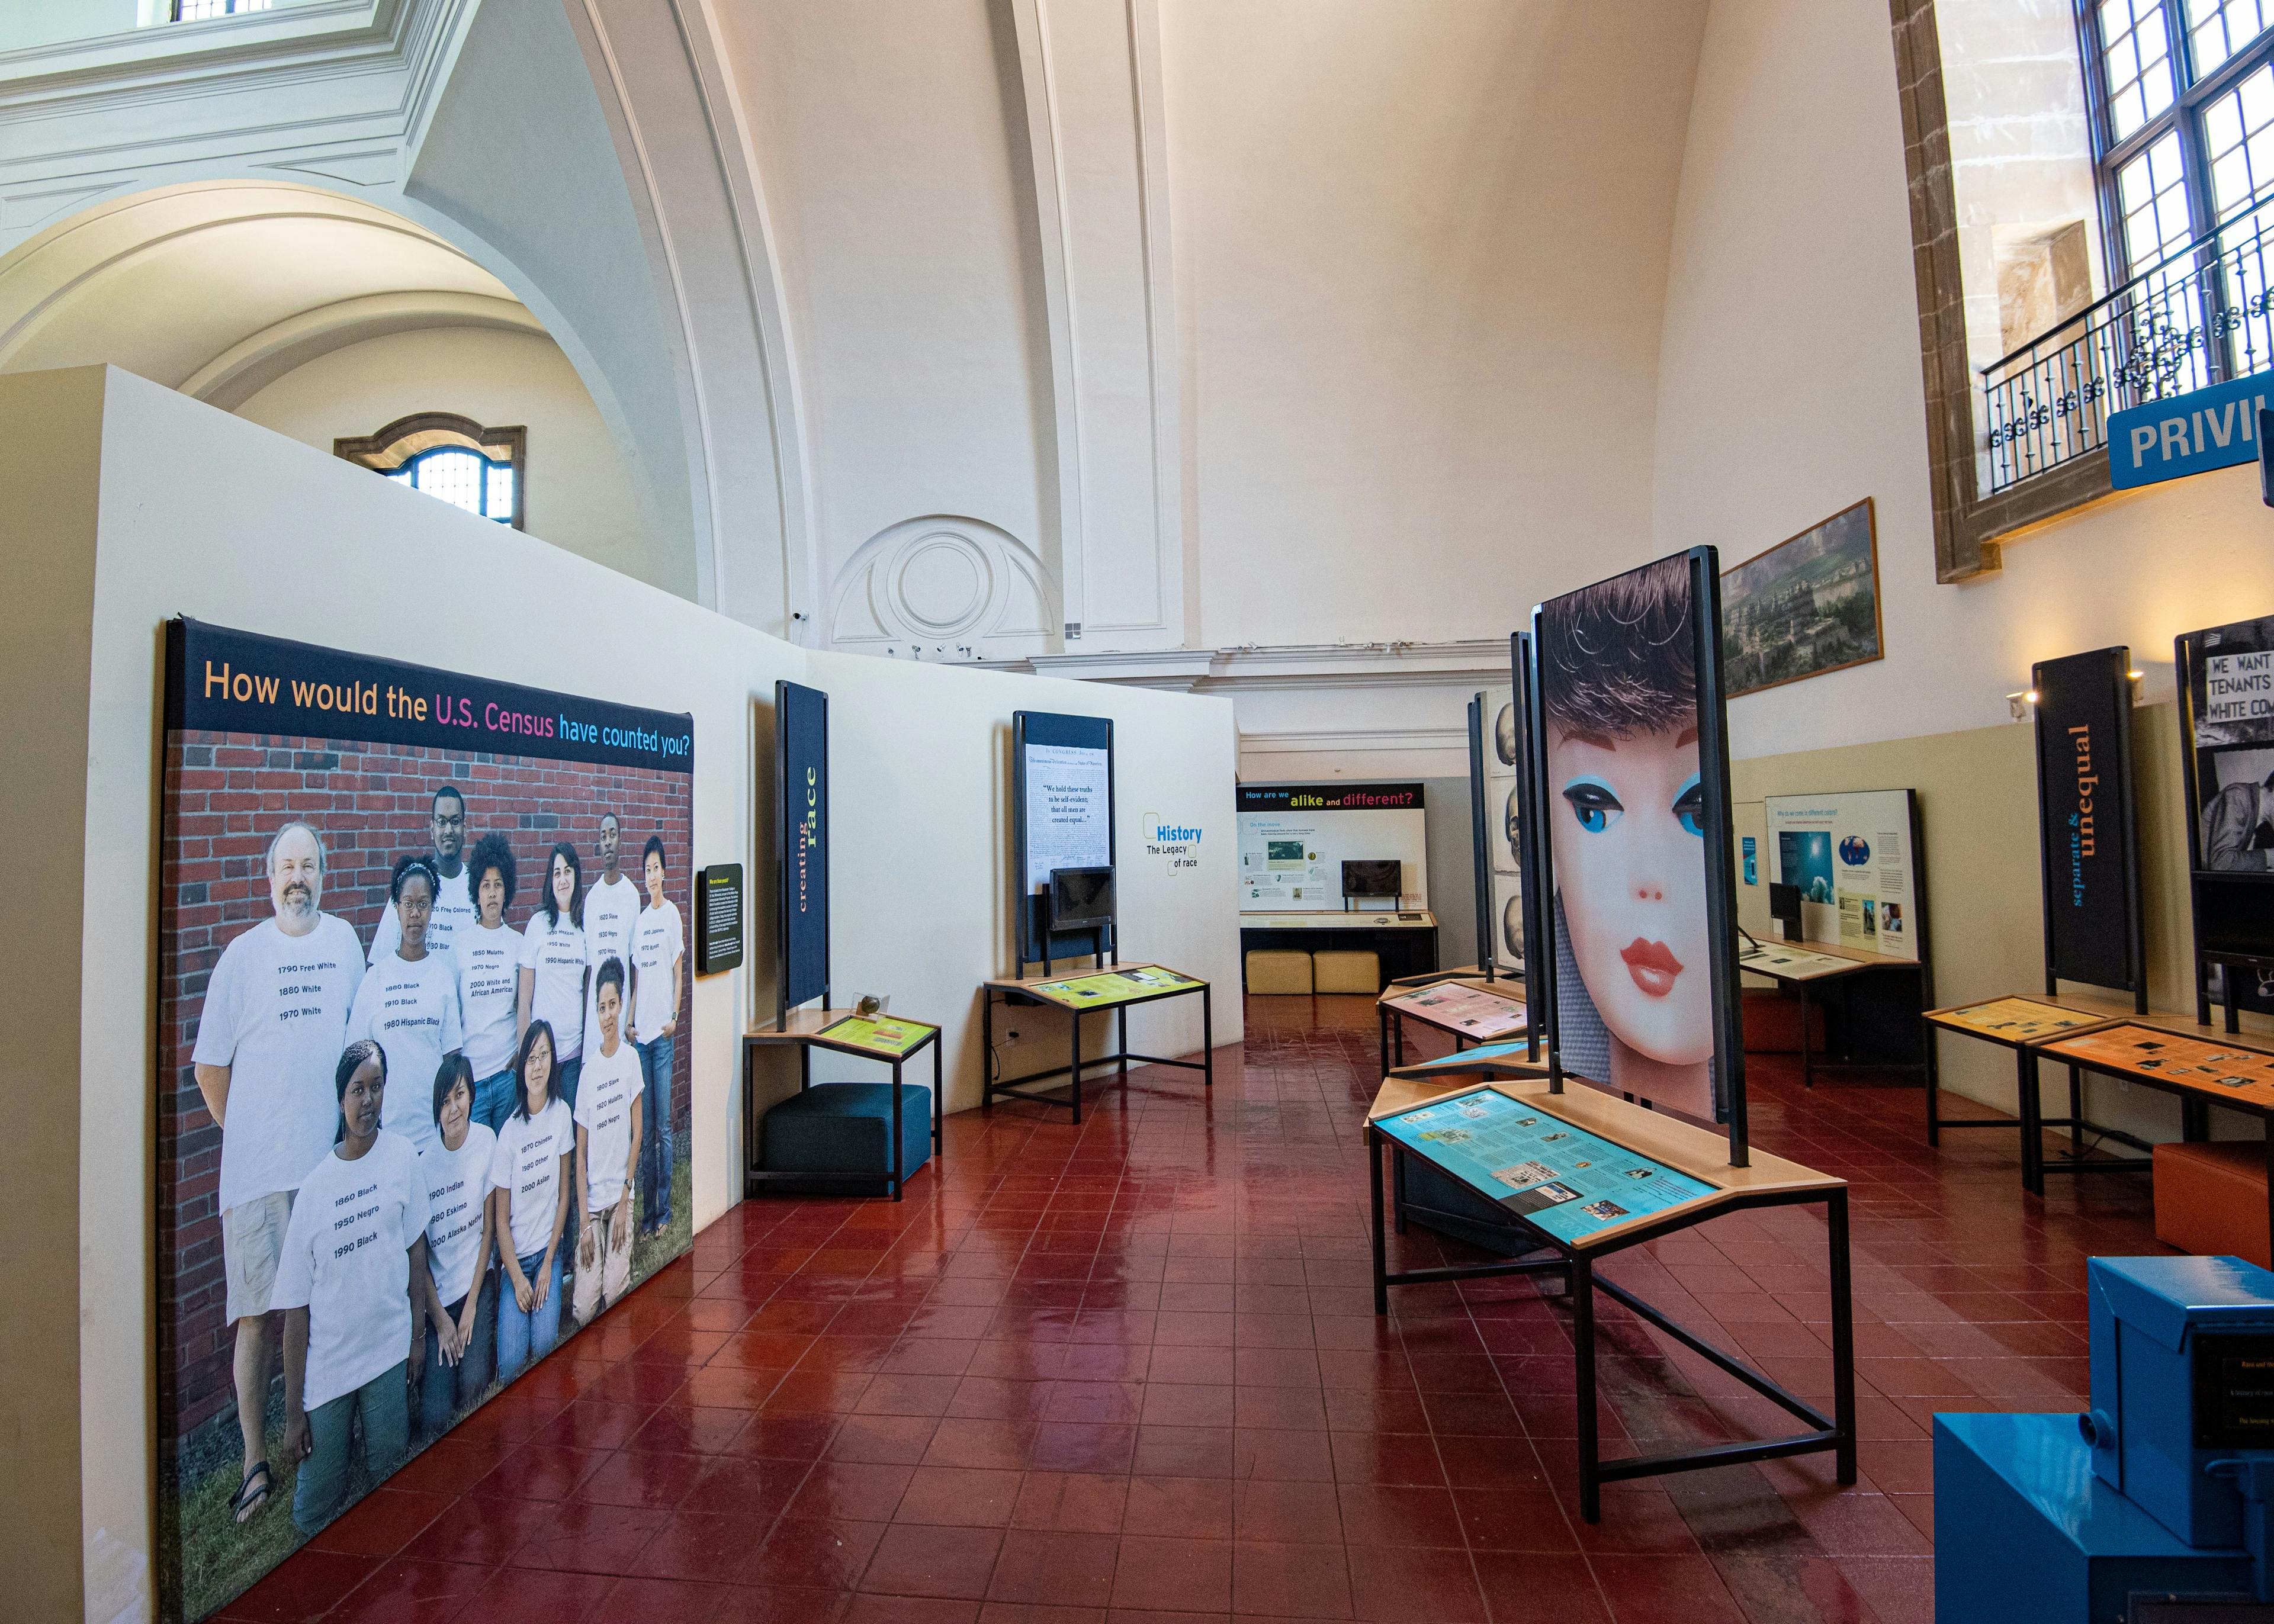 An image inside the "Race: Are We So Different?" exhibit featuring a life-sized group portraits of diverse people on the left, and various tables and museum signage, one depicting a large image of a white children's doll, on the right.